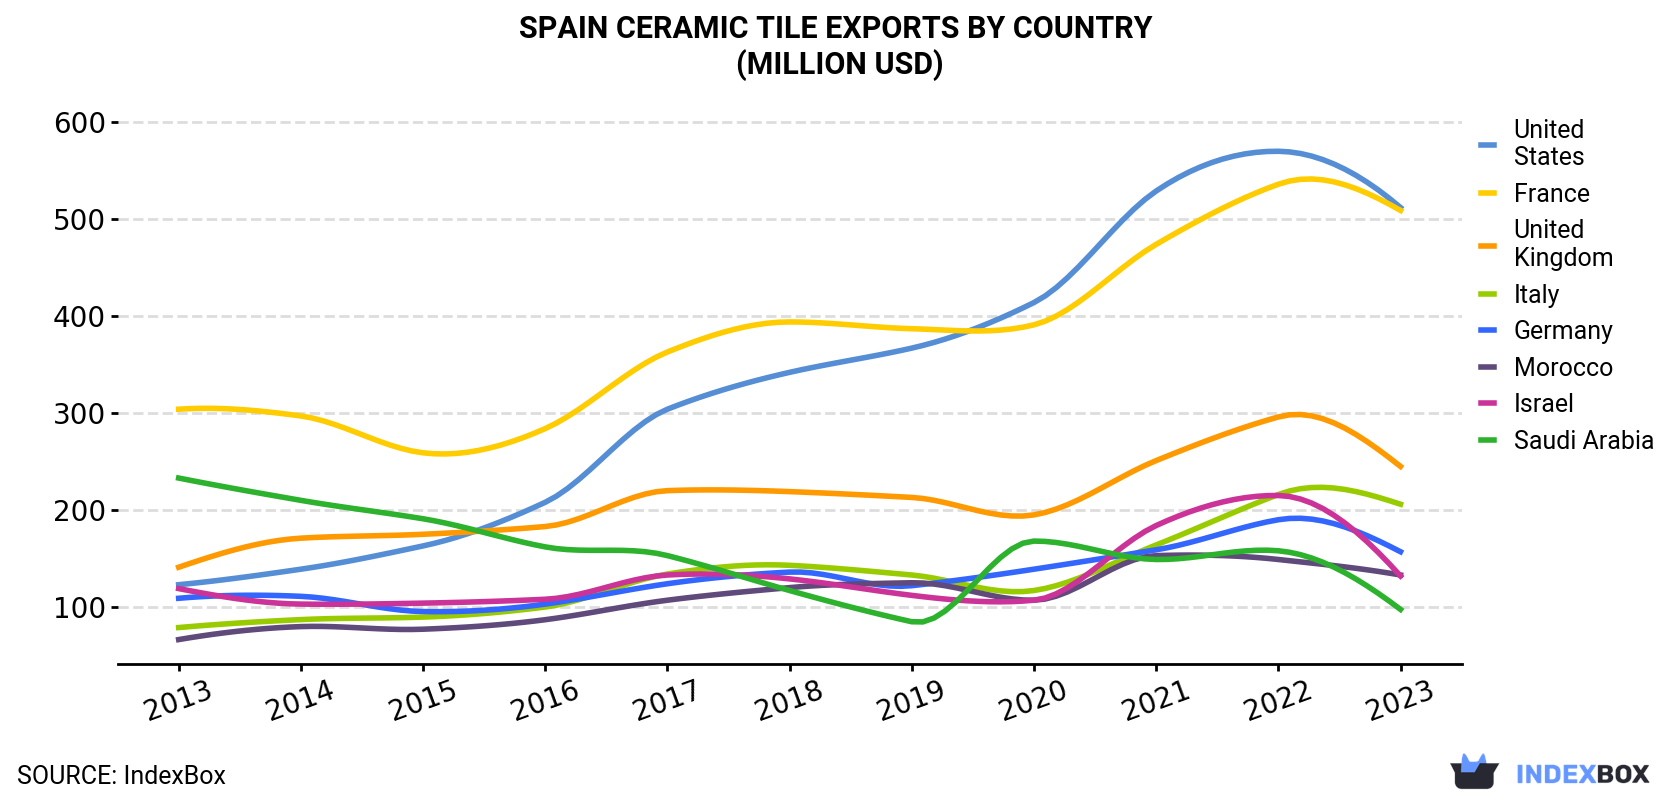 Spain Ceramic Tile Exports By Country (Million USD)